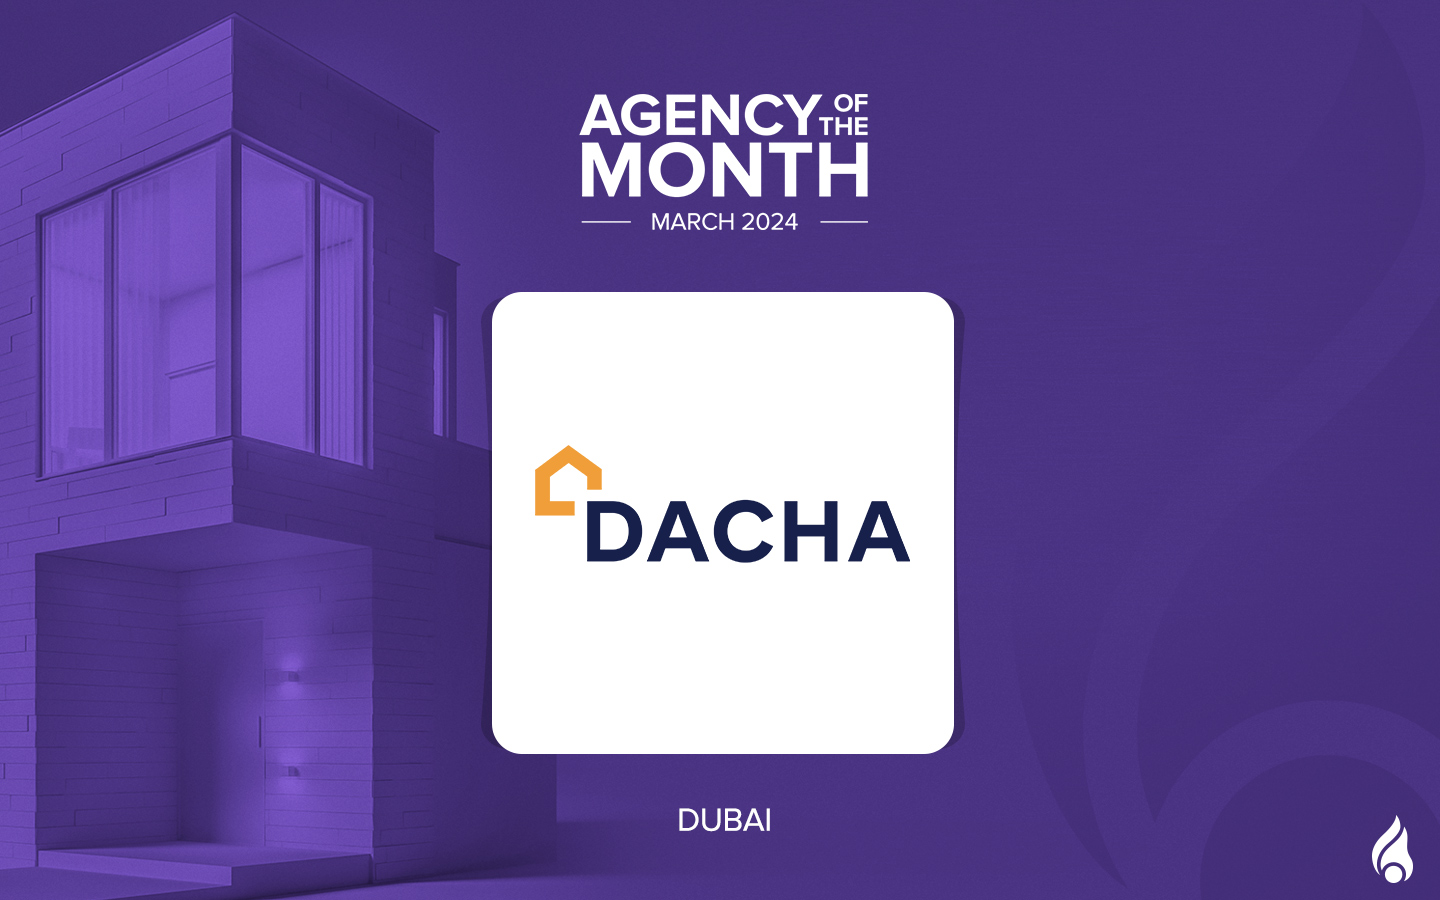 Agency of the month Dubai March 2024